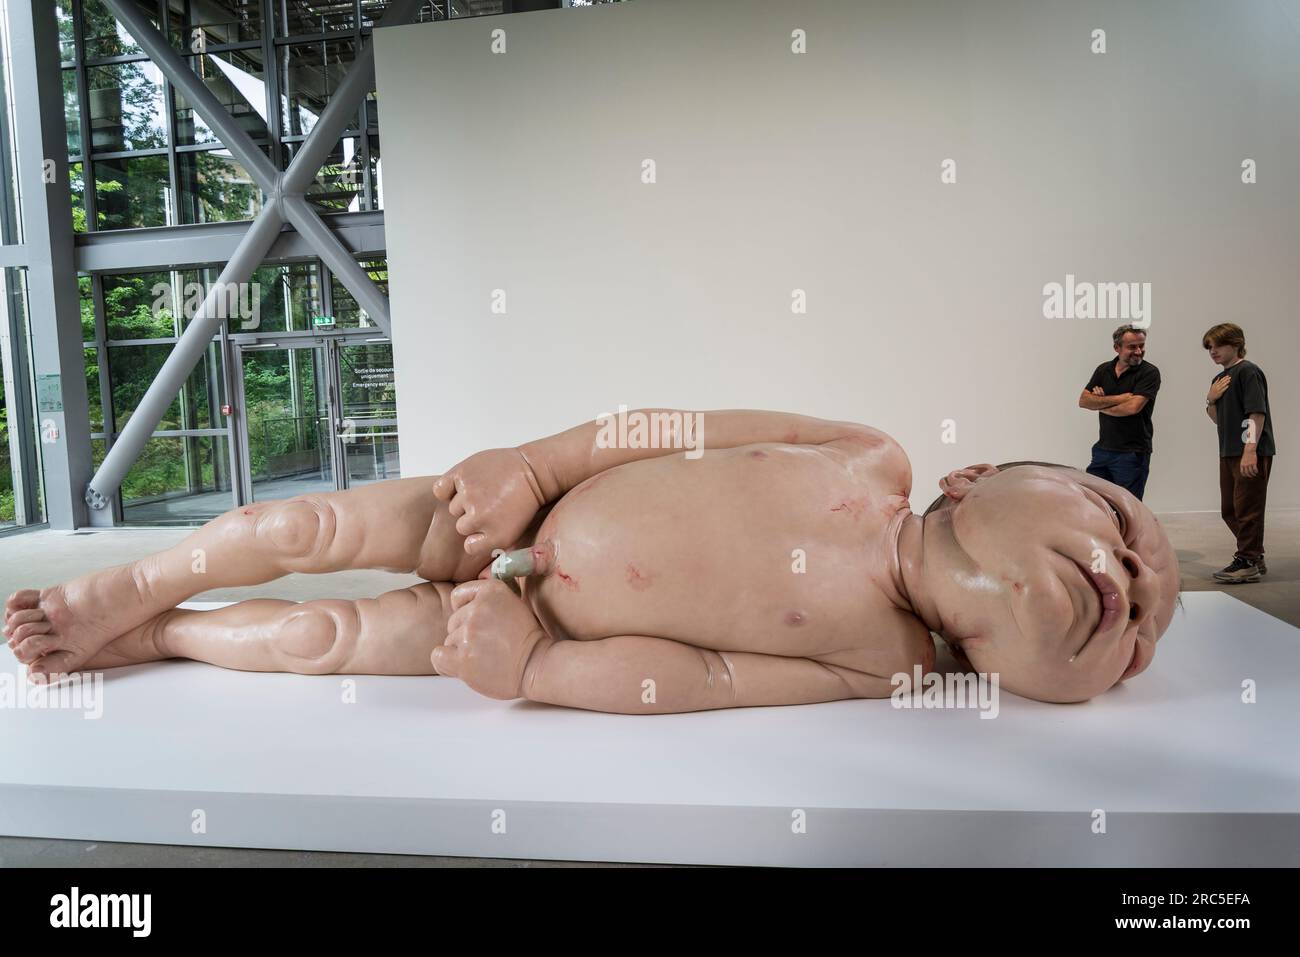 A Girl (2006), sculpture of a gigantic newborn by, Ron Mueck, Fondation Cartier, a contemporary art museum,  located in a glass building designed by P Stock Photo